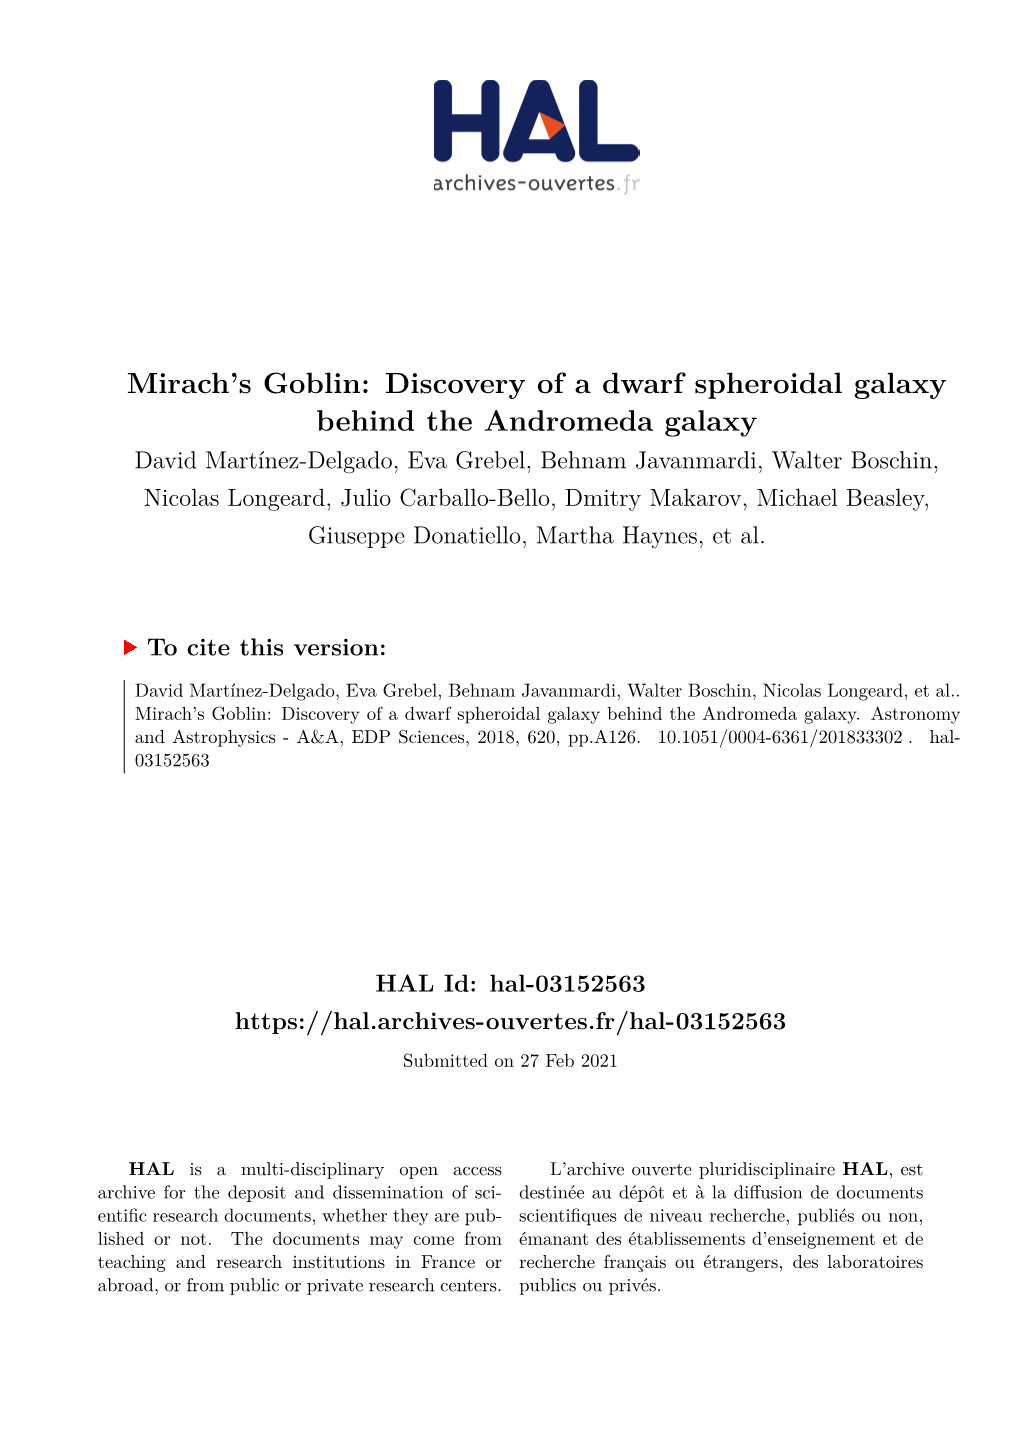 Discovery of a Dwarf Spheroidal Galaxy Behind the Andromeda Galaxy